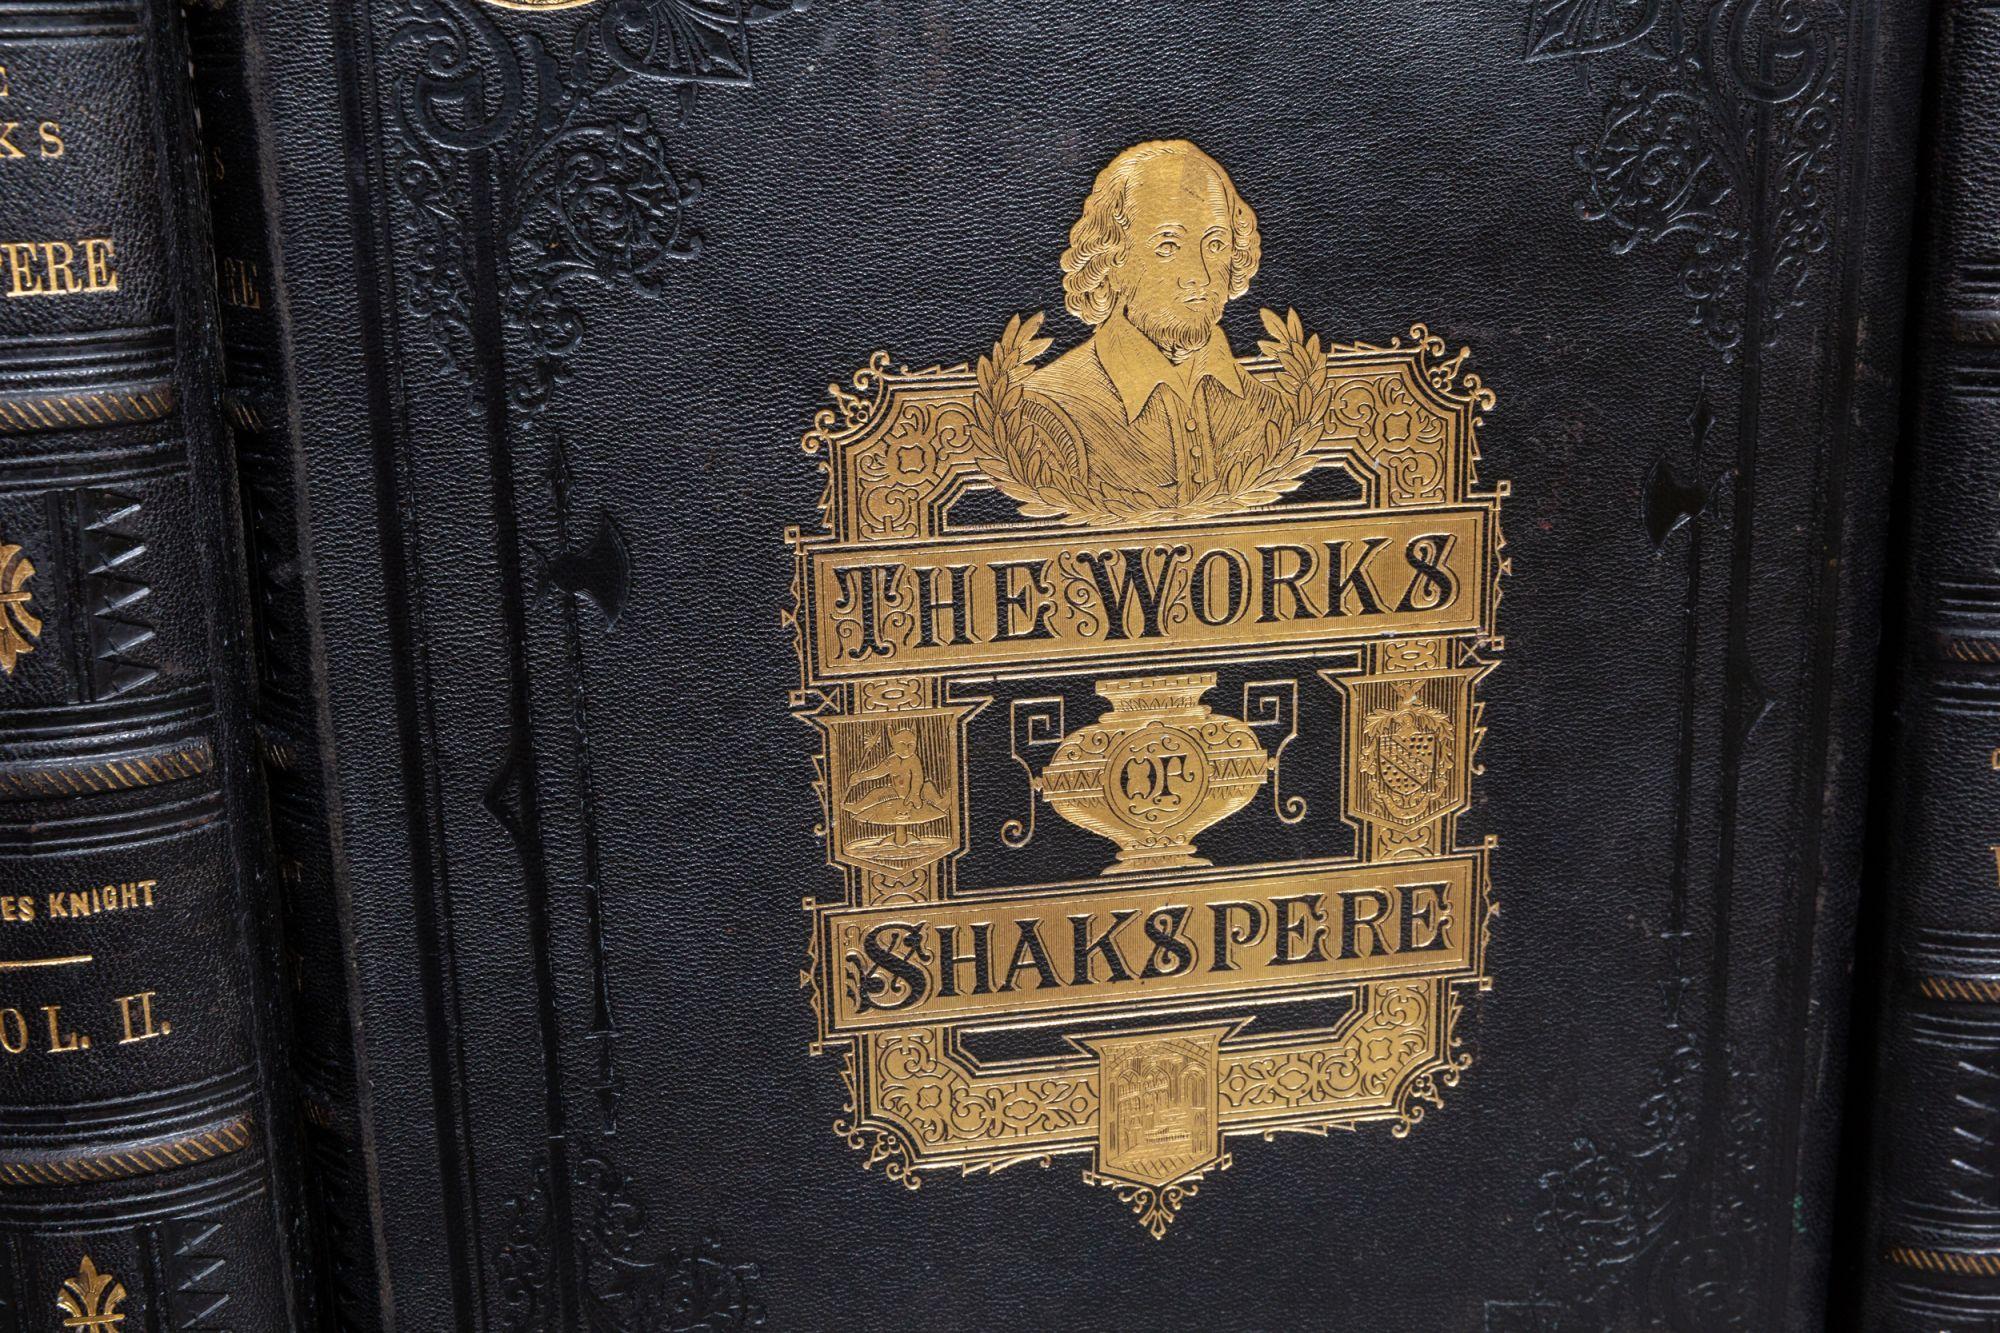 4 Volumes. William Shakespeare. The Complete Works. Edited by Charles Knight. Imperial Edition. Bound in full black morocco by N. D. MacDonald & Co. Ornate gilt designs of Shakespeare on covers with gilt on spines. Raised bands, inner dentelles, all